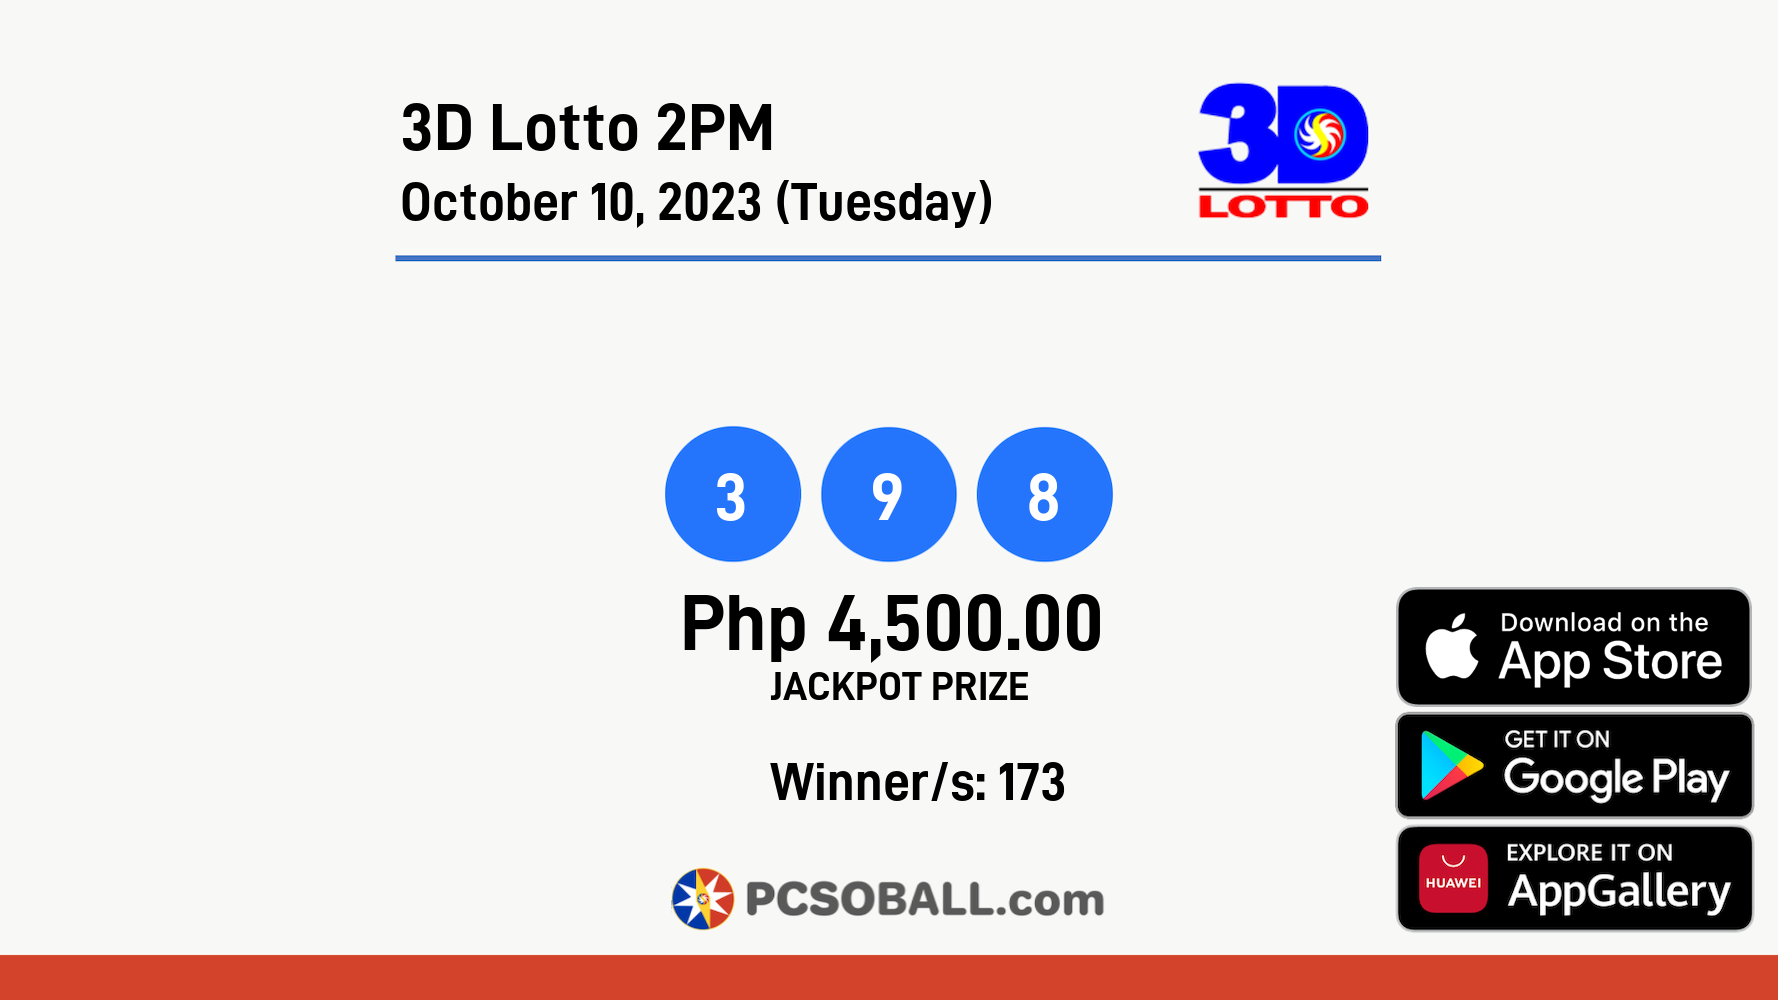 3D Lotto 2PM October 10, 2023 (Tuesday) Result